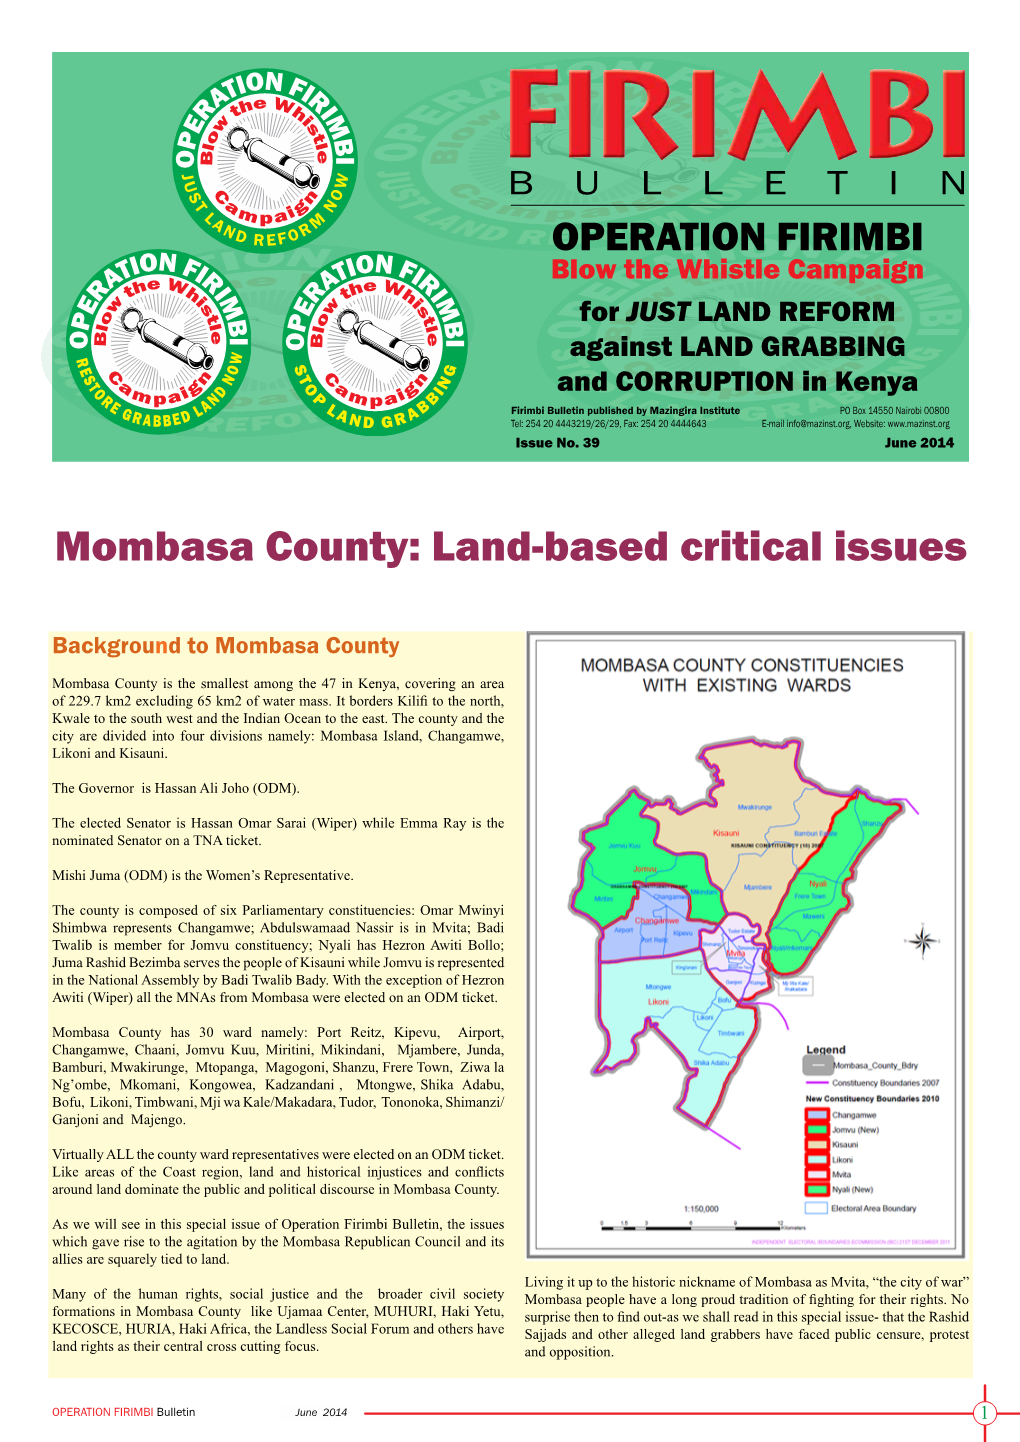 Mombasa County: Land-Based Critical Issues